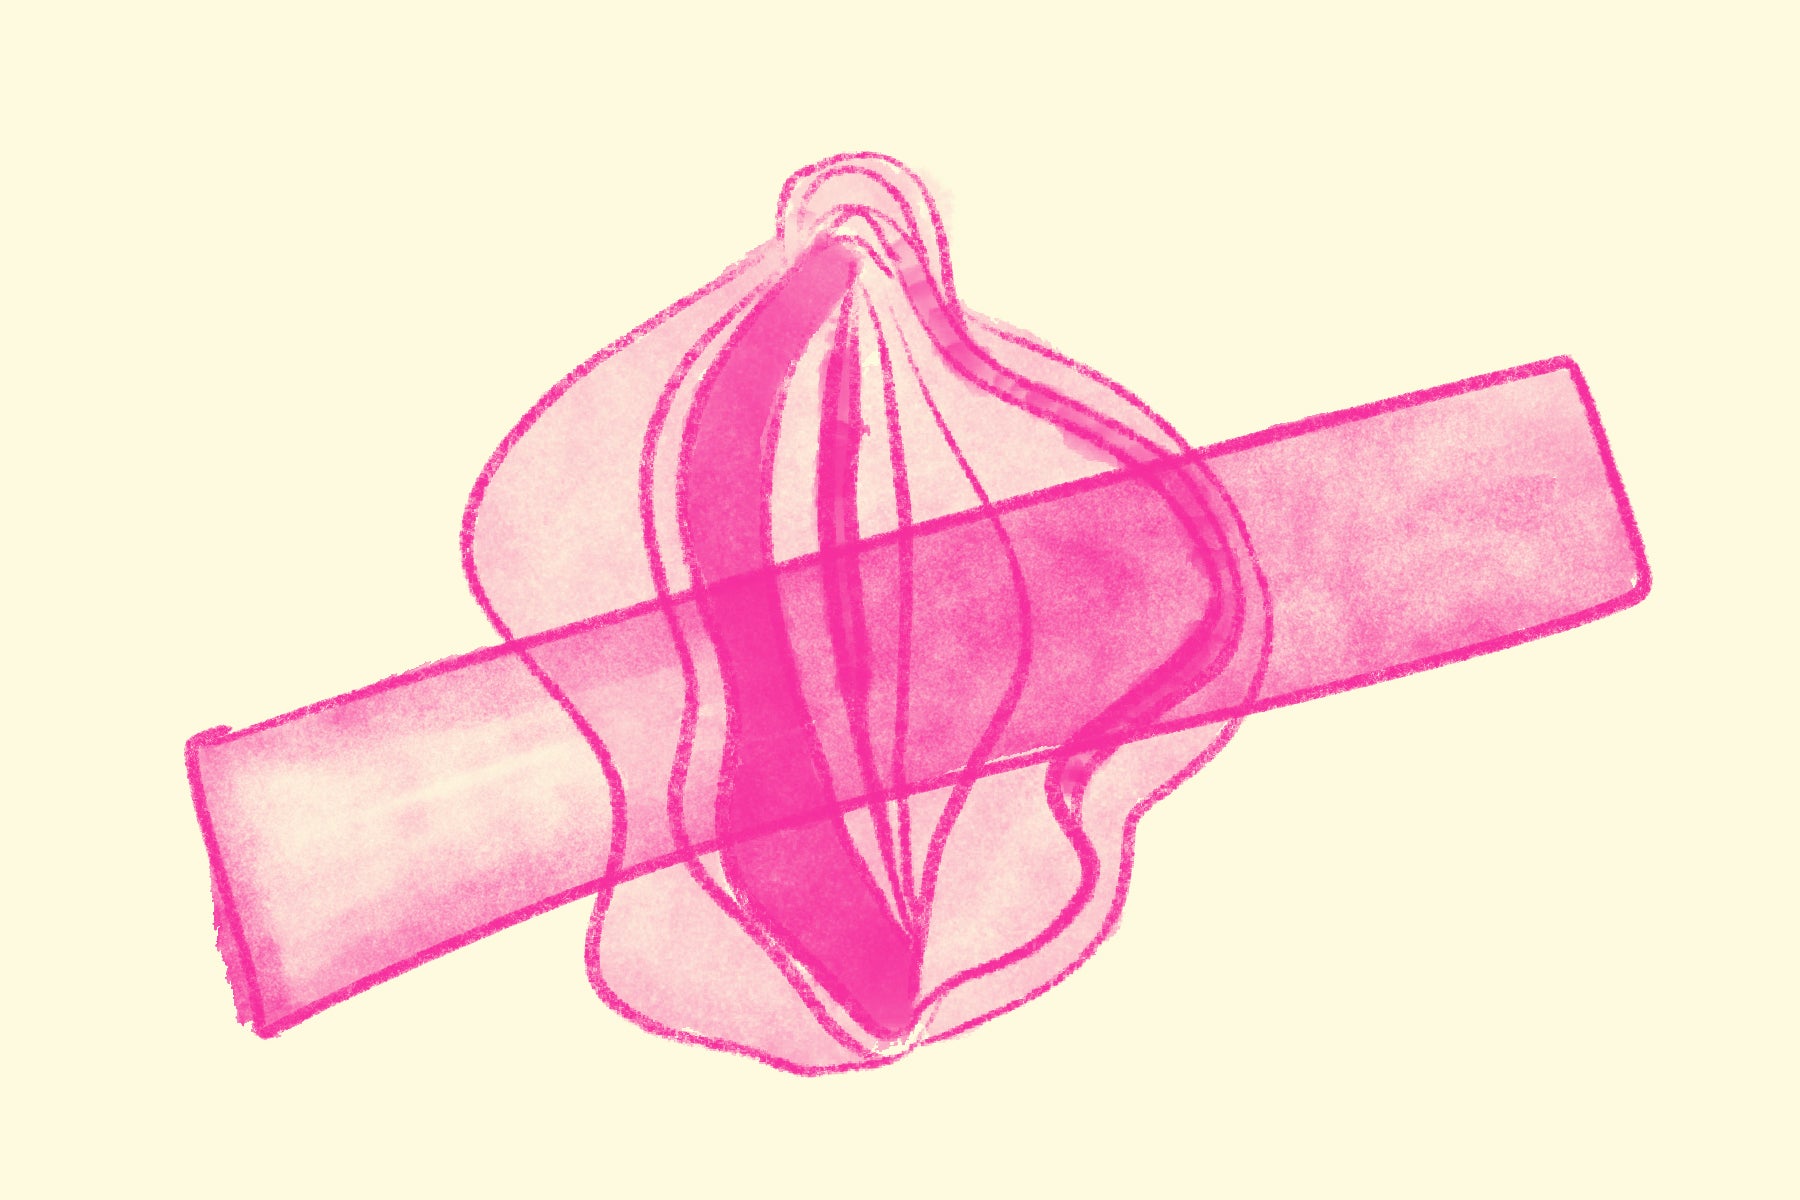 How medical research has failed the vulva owners